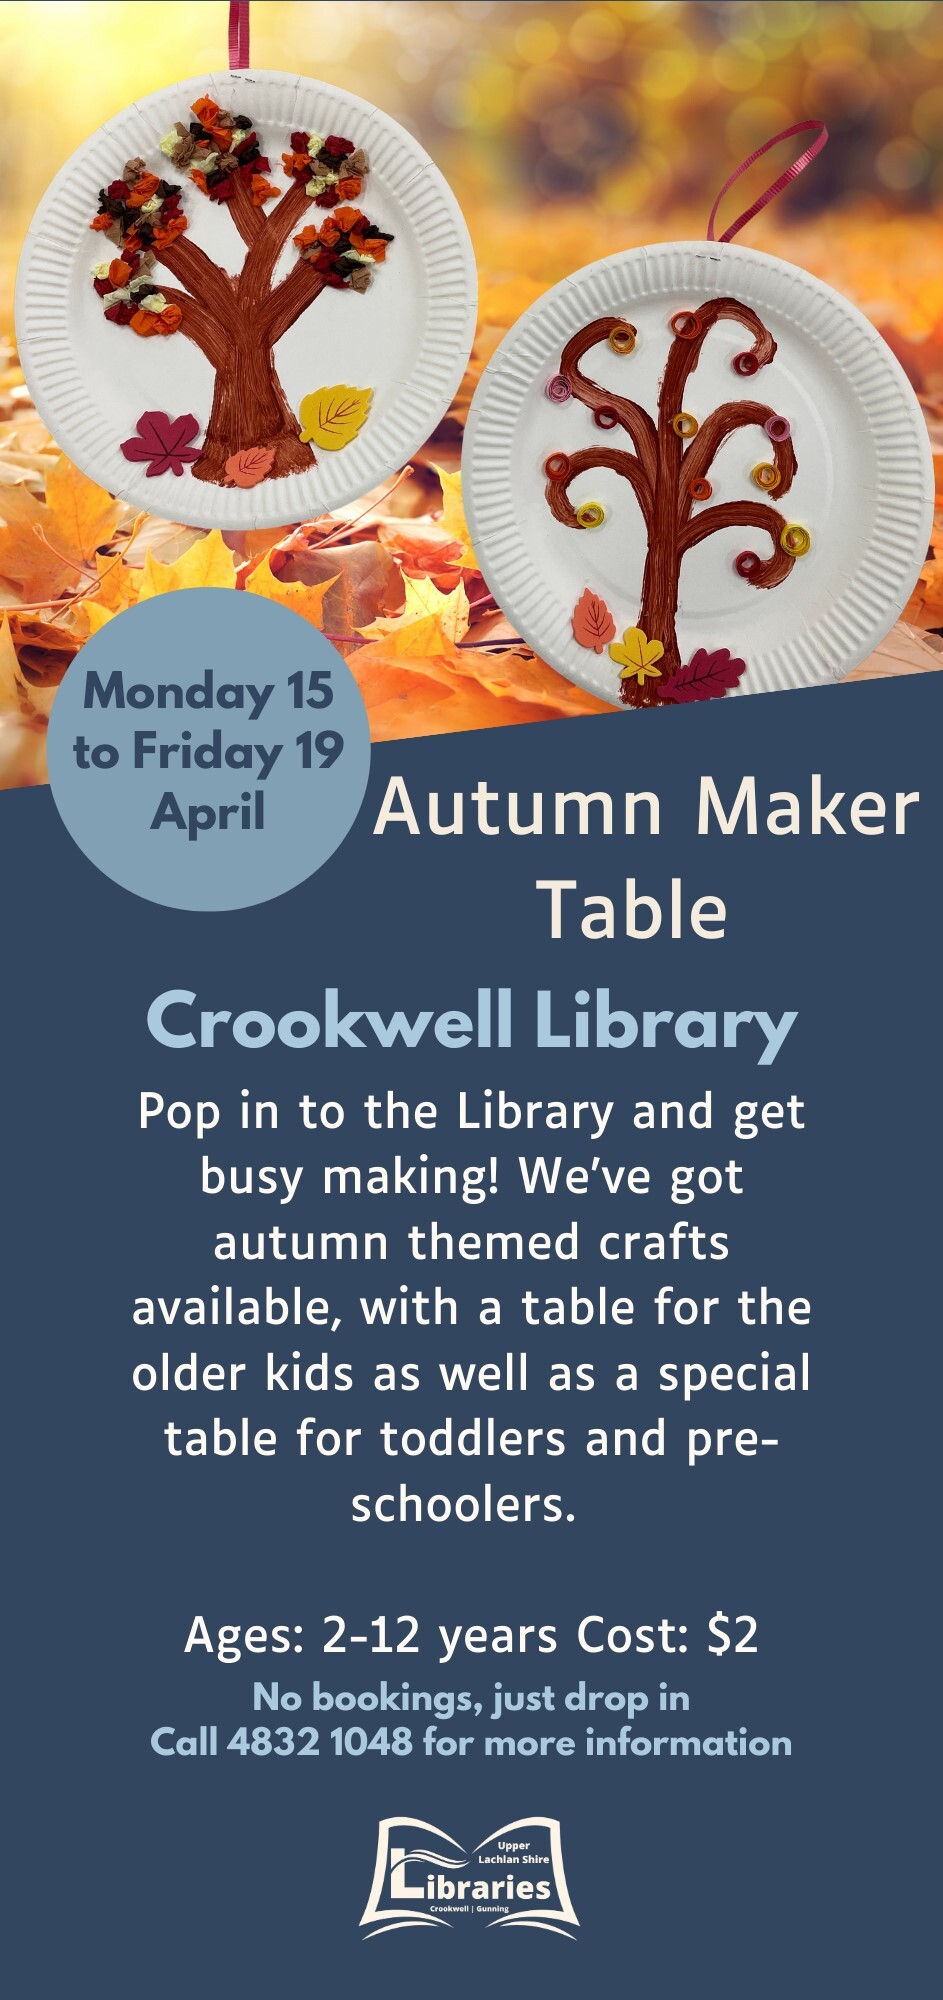 Crookwell Autumn Maker Table